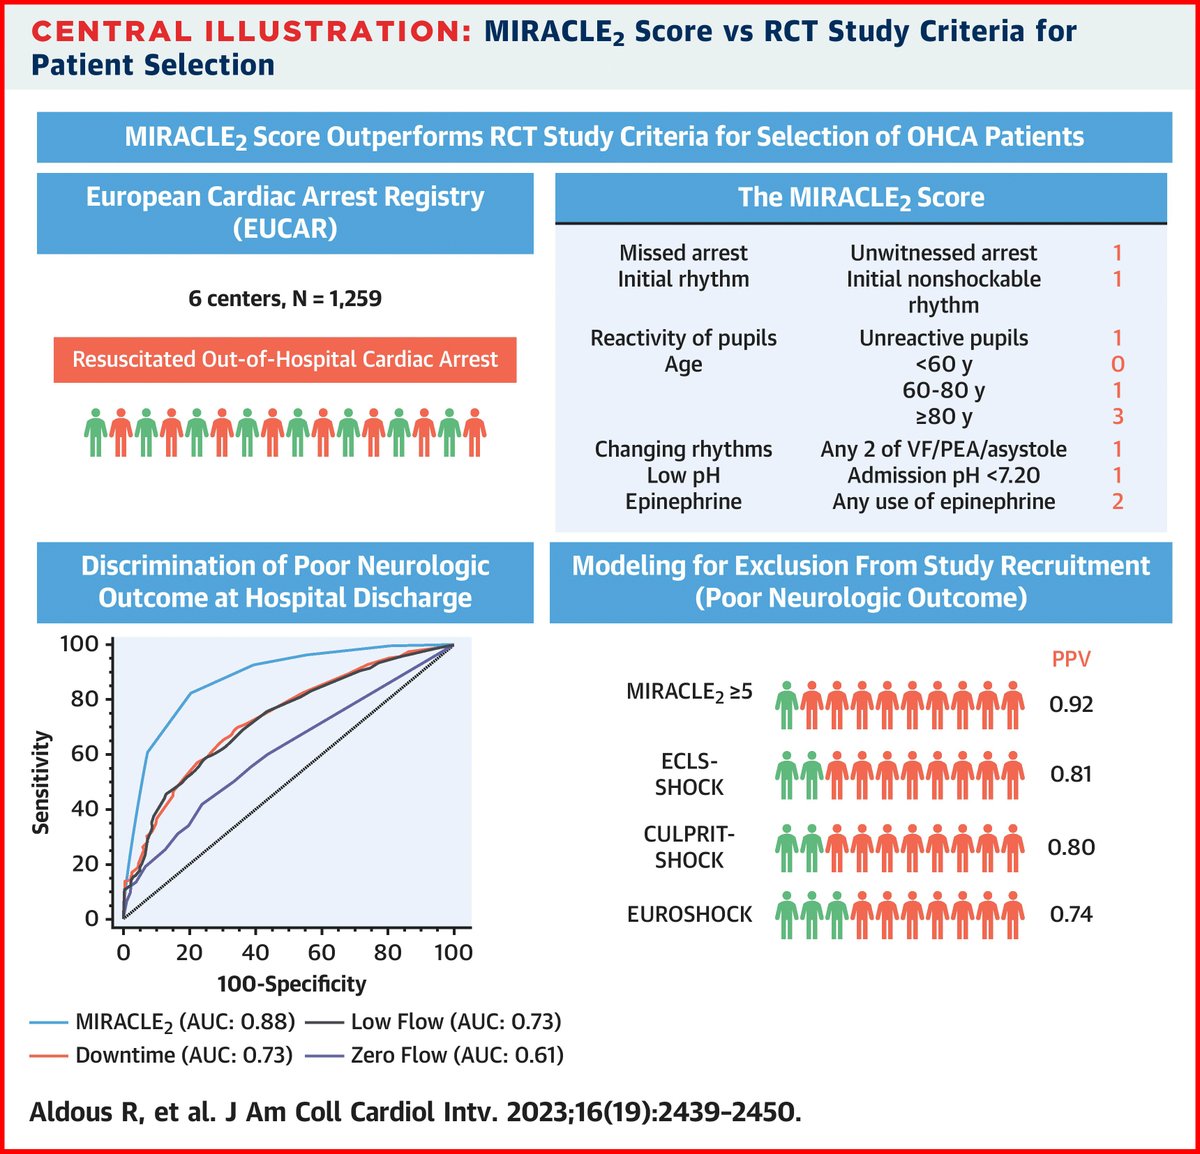 MIRACLE2 score & post-#OHCA outcomes! Stronger associations (OR: 2.23) than downtime, zero flow, low flow, & superior discrimination (AUC: 0.877)! Positive predictive value of MIRACLE2 (score ≥5) beats current RCT criteria bit.ly/45UEC4p #JACCINT #ACCFIT #CardioTwitter